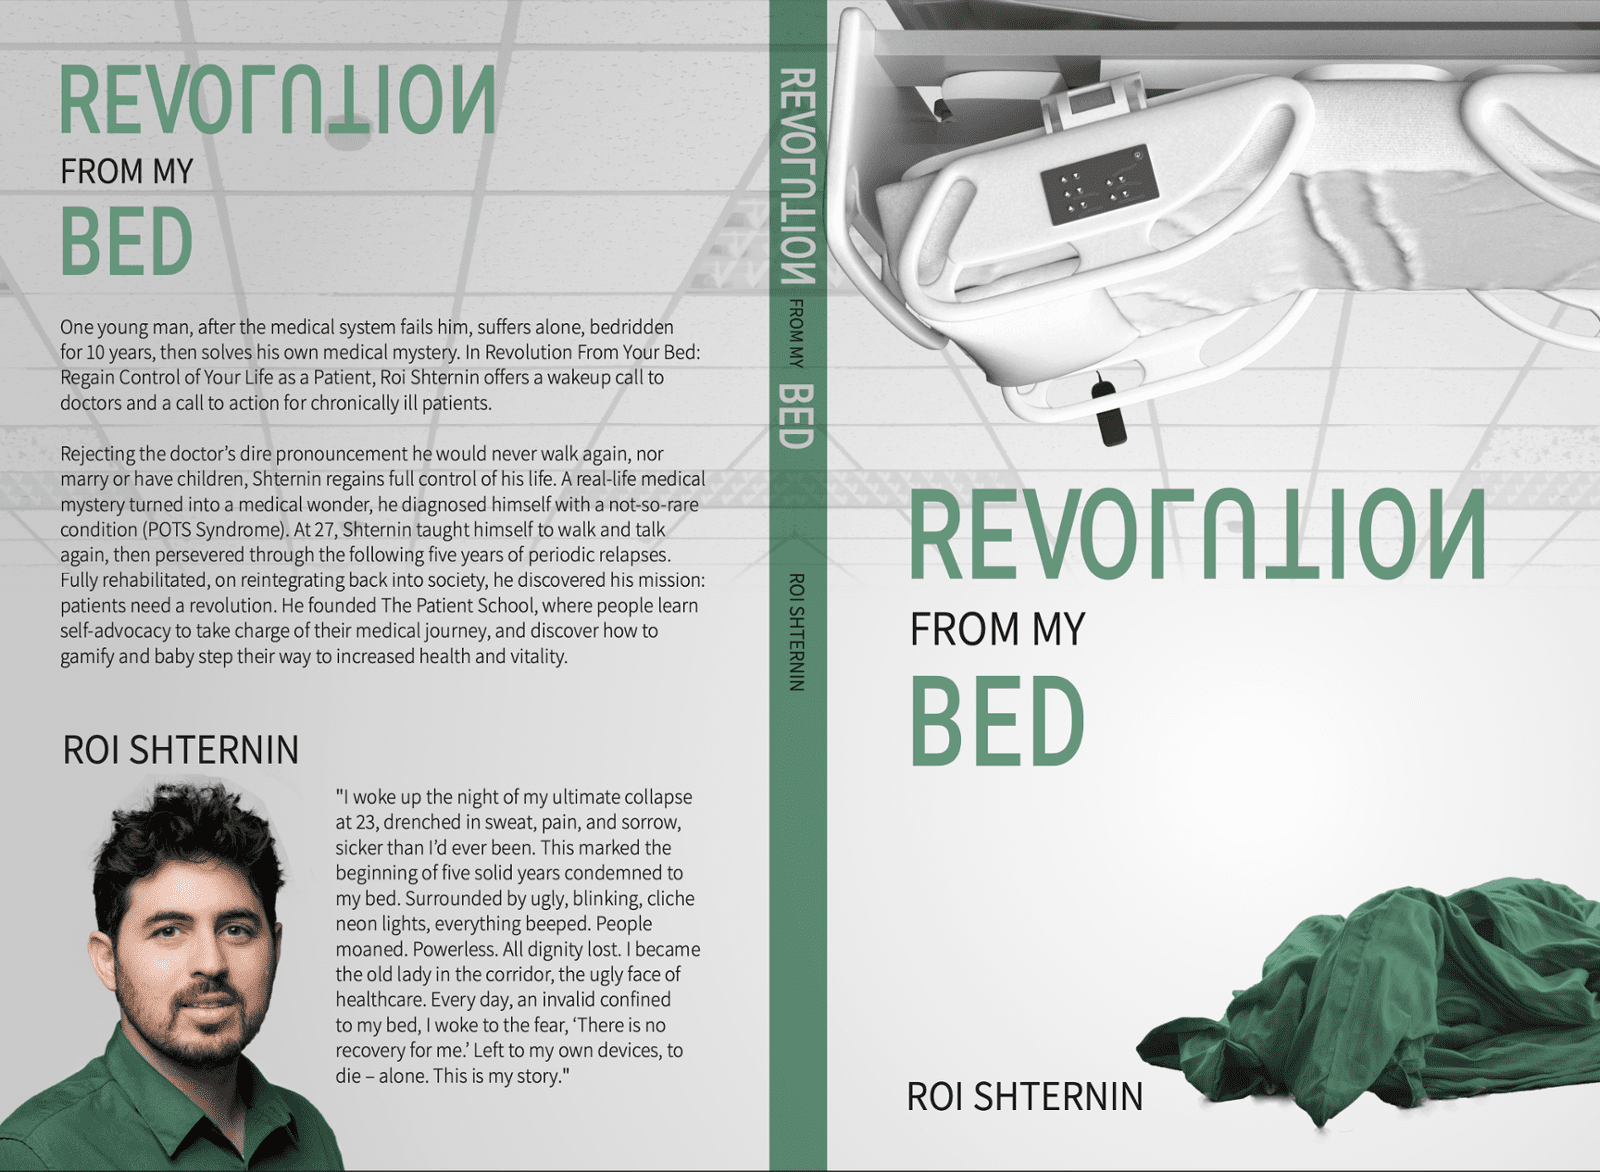 Revolution from my bed: Regain control of your life as a Patient